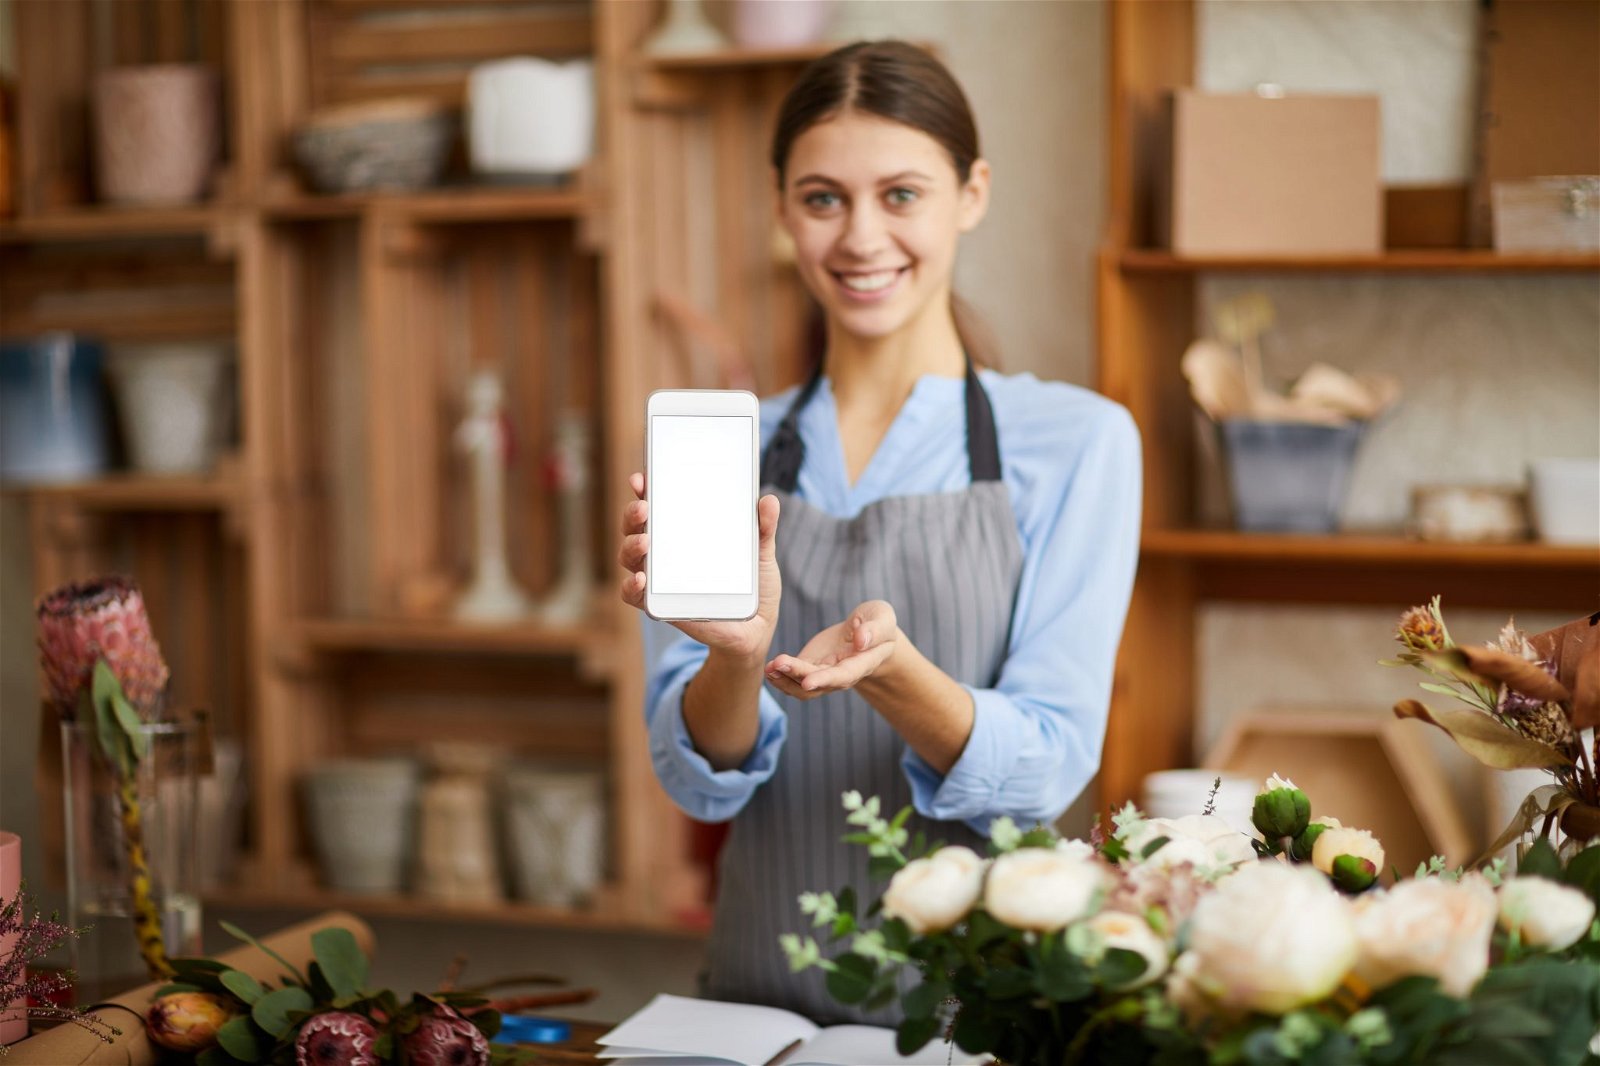 Mobile Apps Are Must For Your Small Business